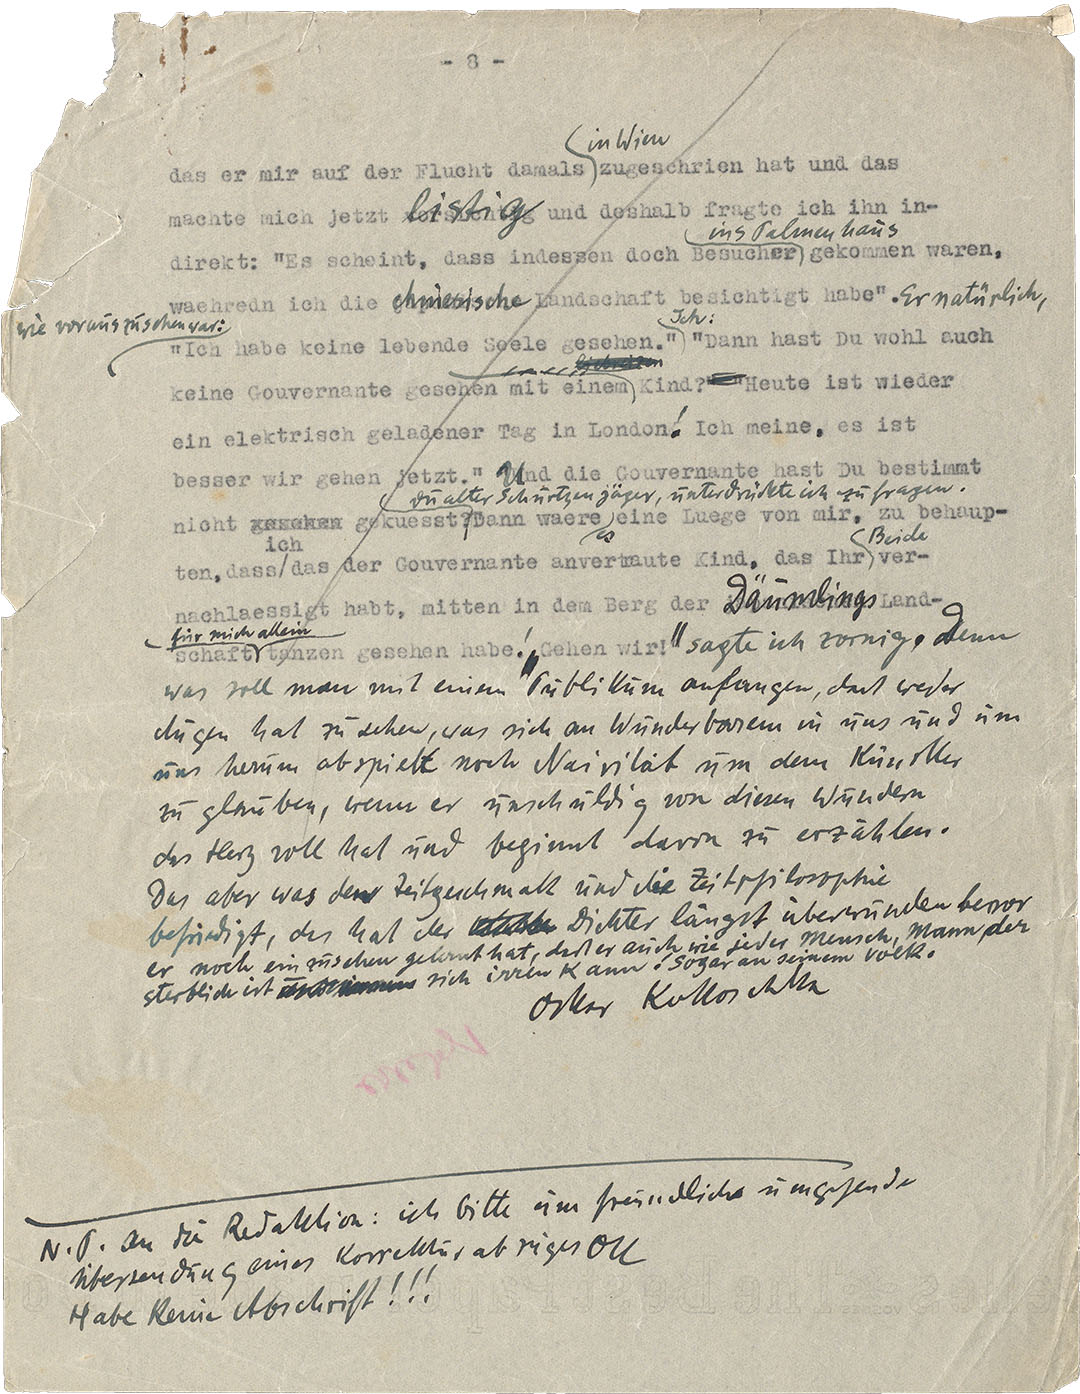 This manuscript in Kokoschka’s own hand of his “Life Story” (1933) was reacquired by Olda Kokoschka at an auction in around 1981 (ZBZ, estate of O. Kokoschka 5a)